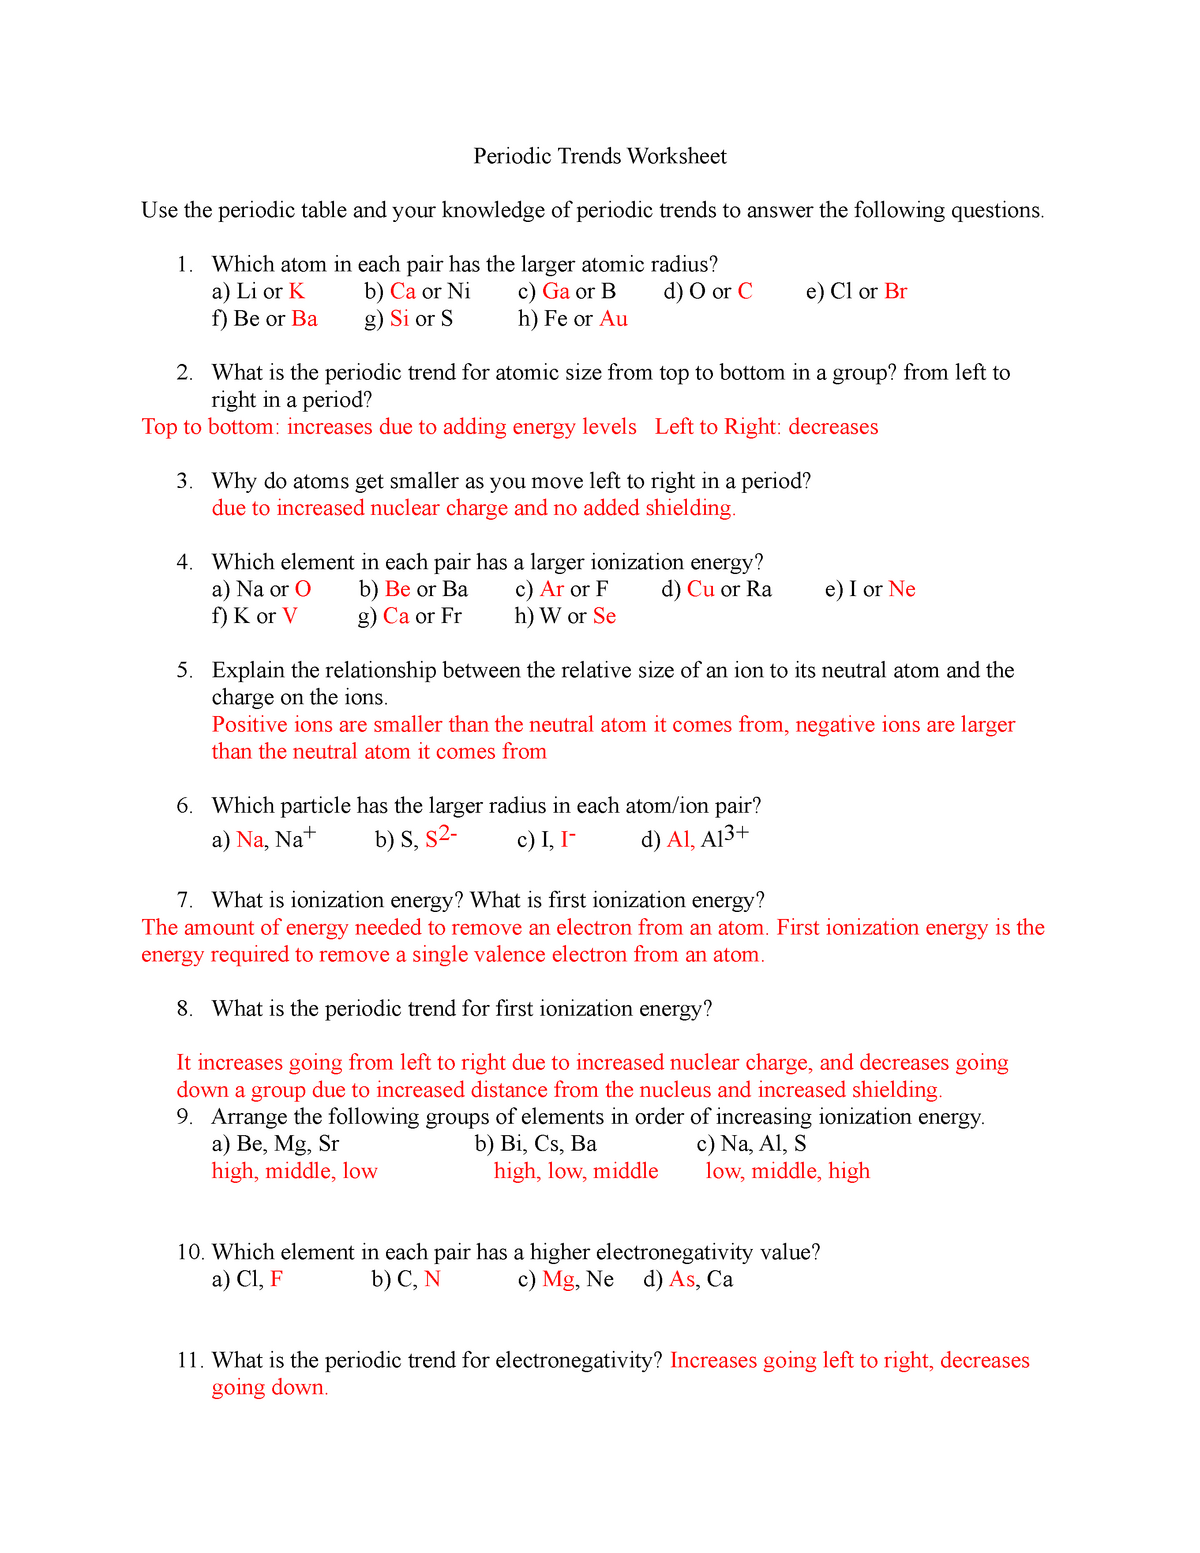 Periodic Trends Worksheet 20 answers - 020:2060:20620 - General Regarding Periodic Table Worksheet Answers